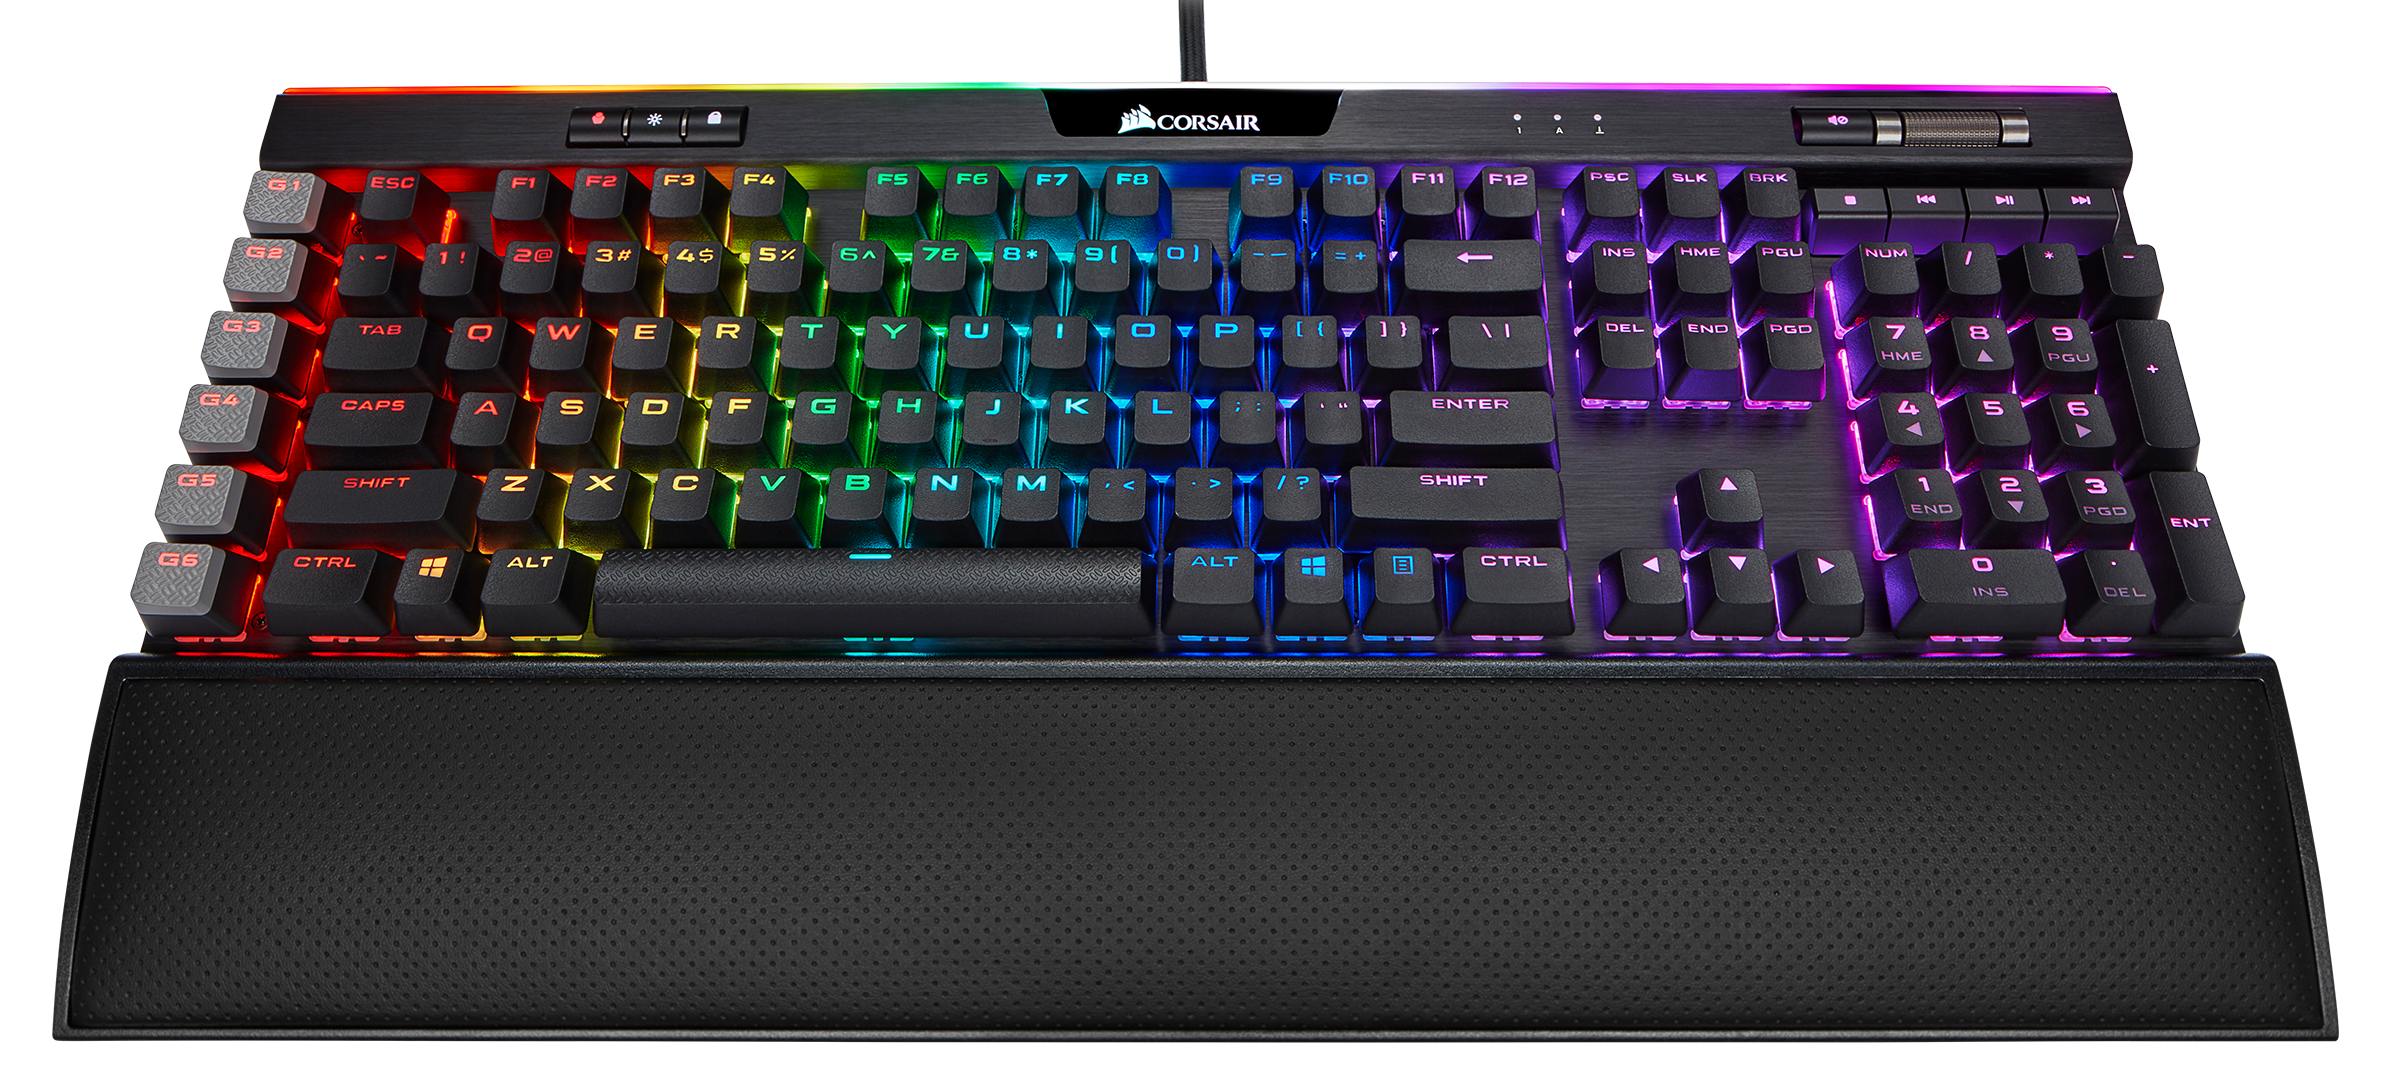 The Corsair K95 Rgb Platinum Xt Mechanical Keyboard For Gamers And Streamers